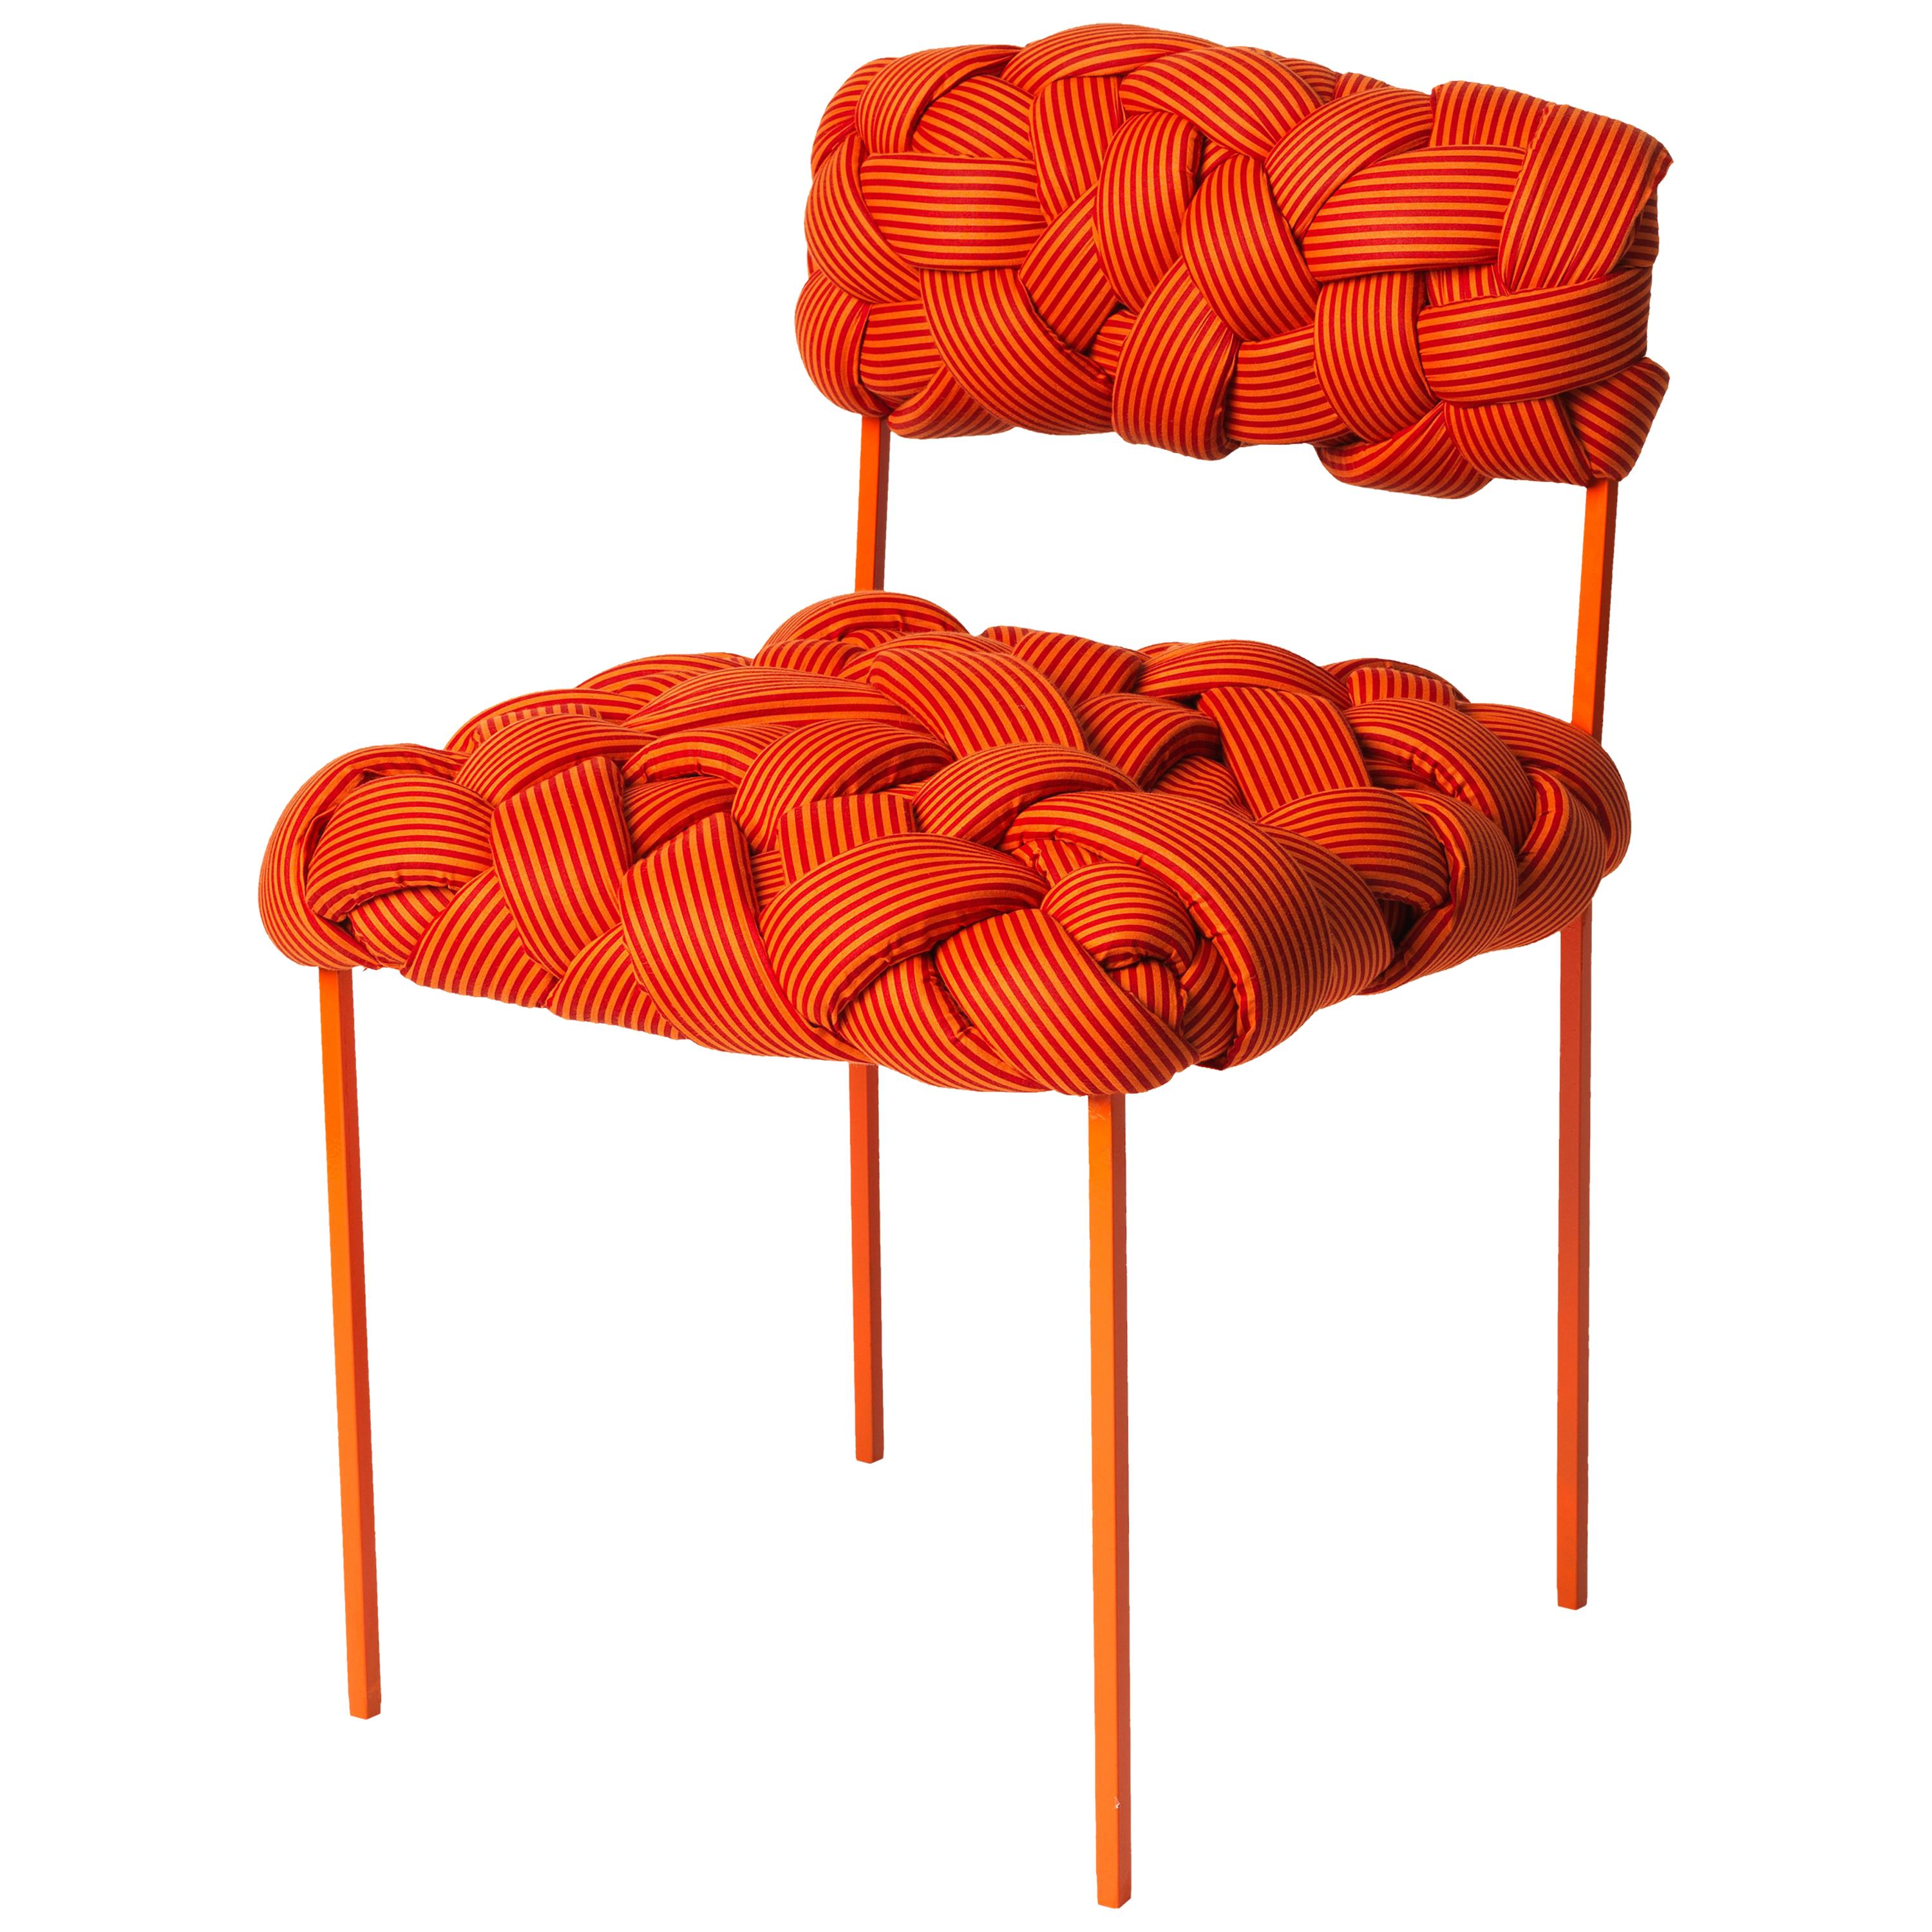 "Cloud" Contemporary Chair with Handwoven Orange Upholstery